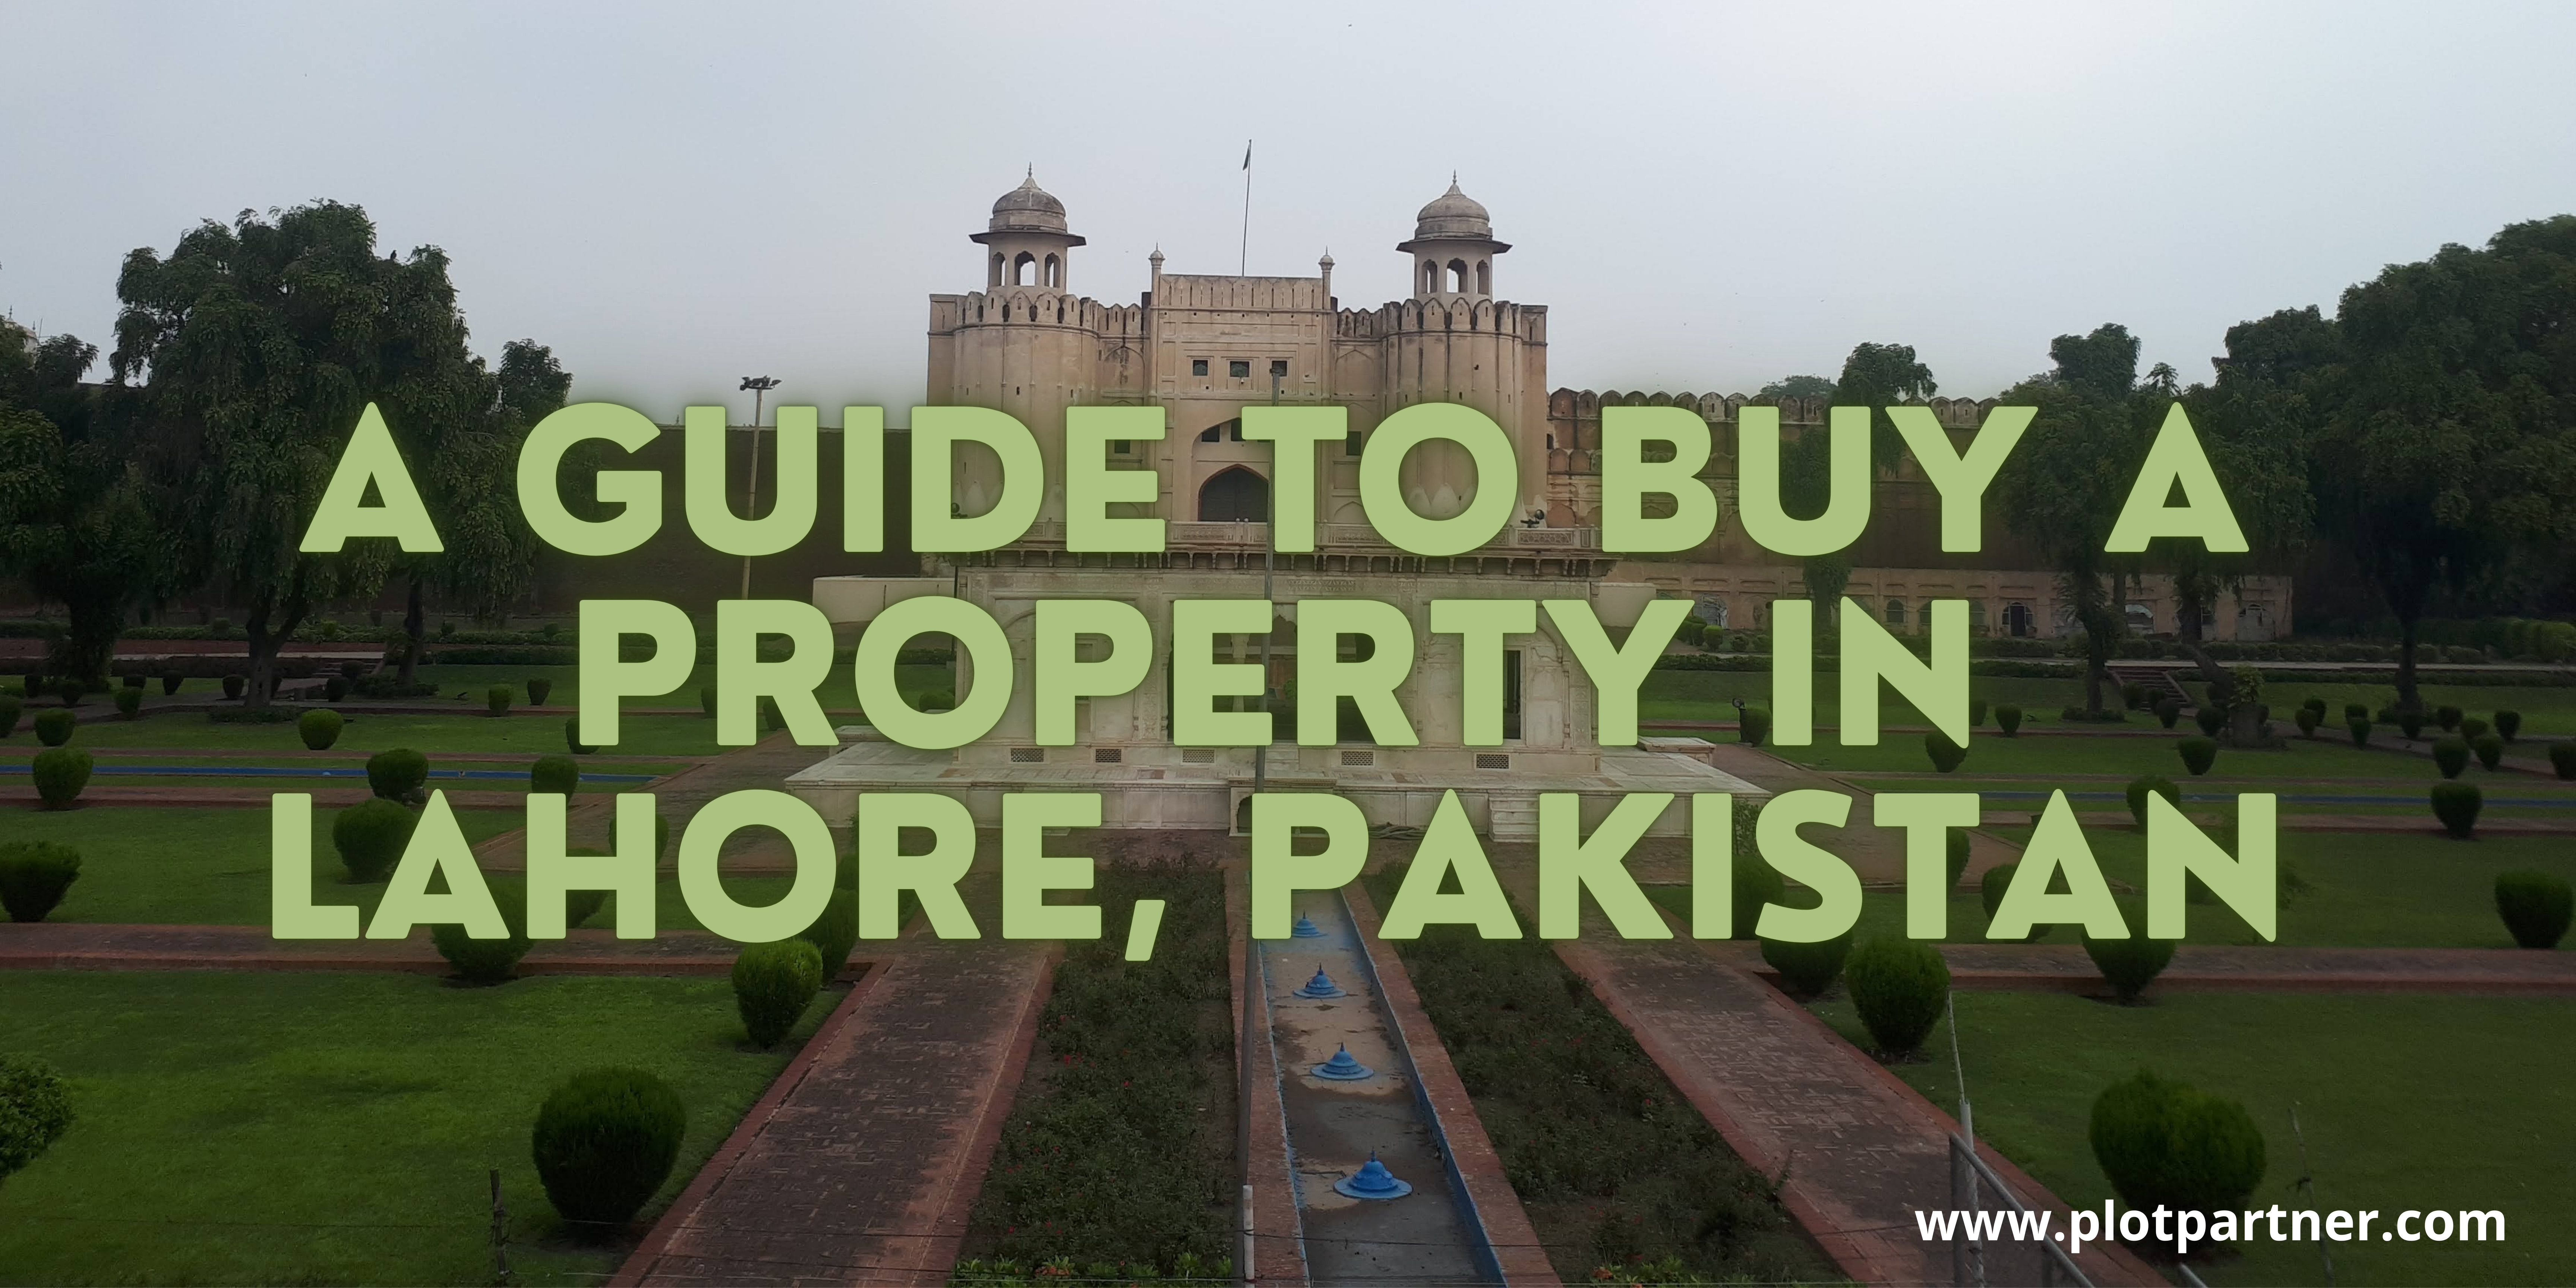 Guide to buy property in Lahore